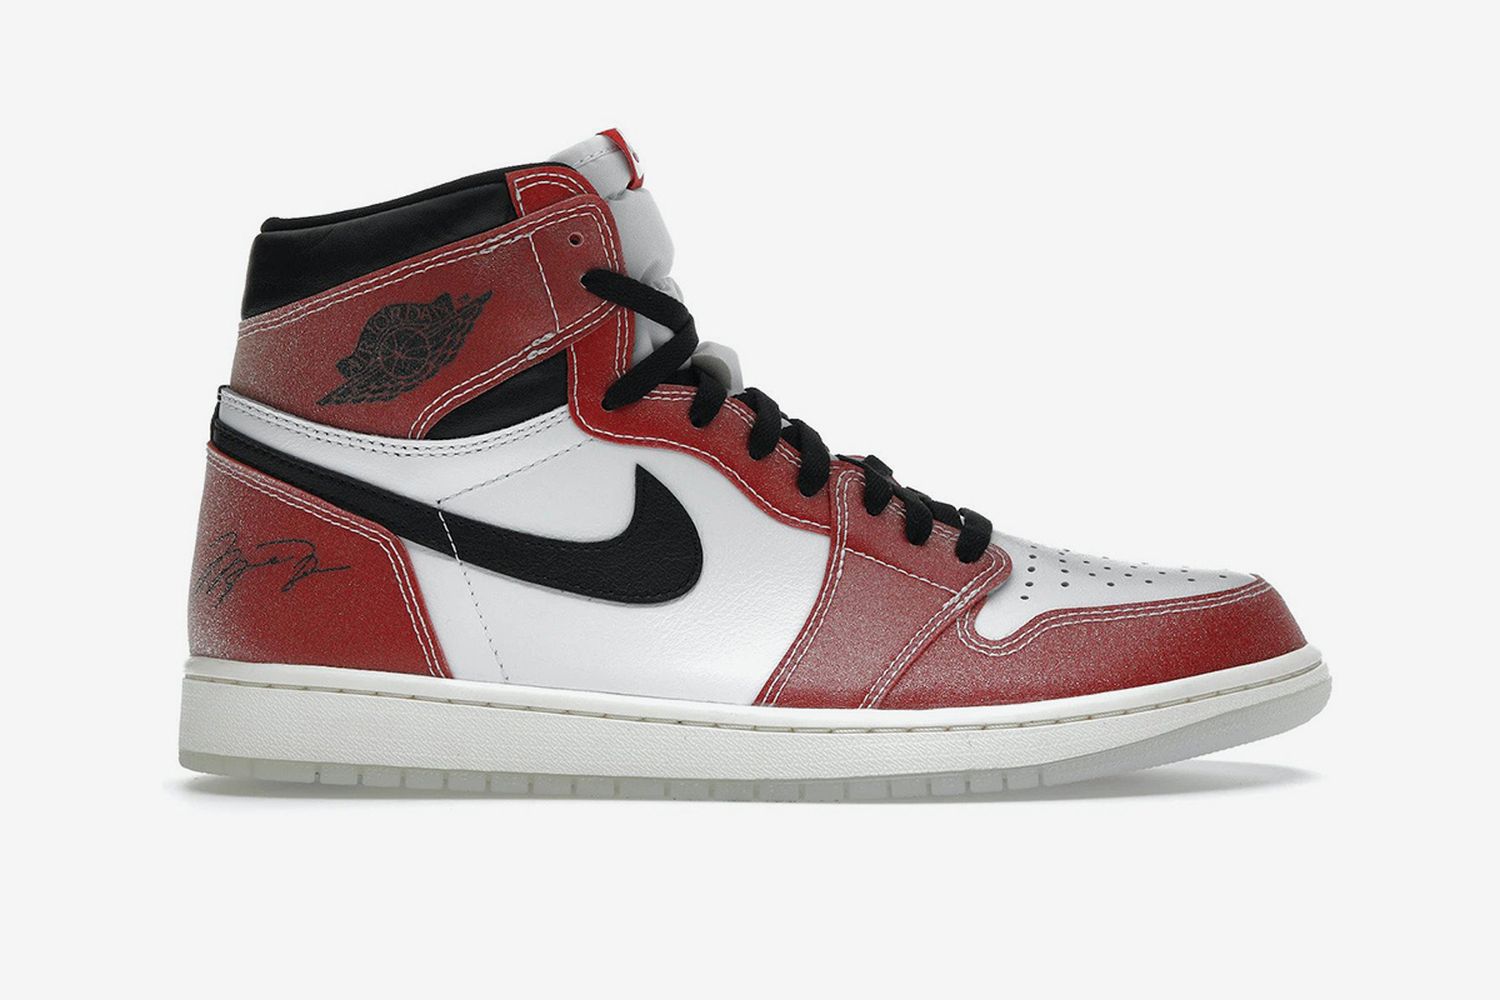 Nike Jordan 1 Chicago History: The Best Pairs & Collabs